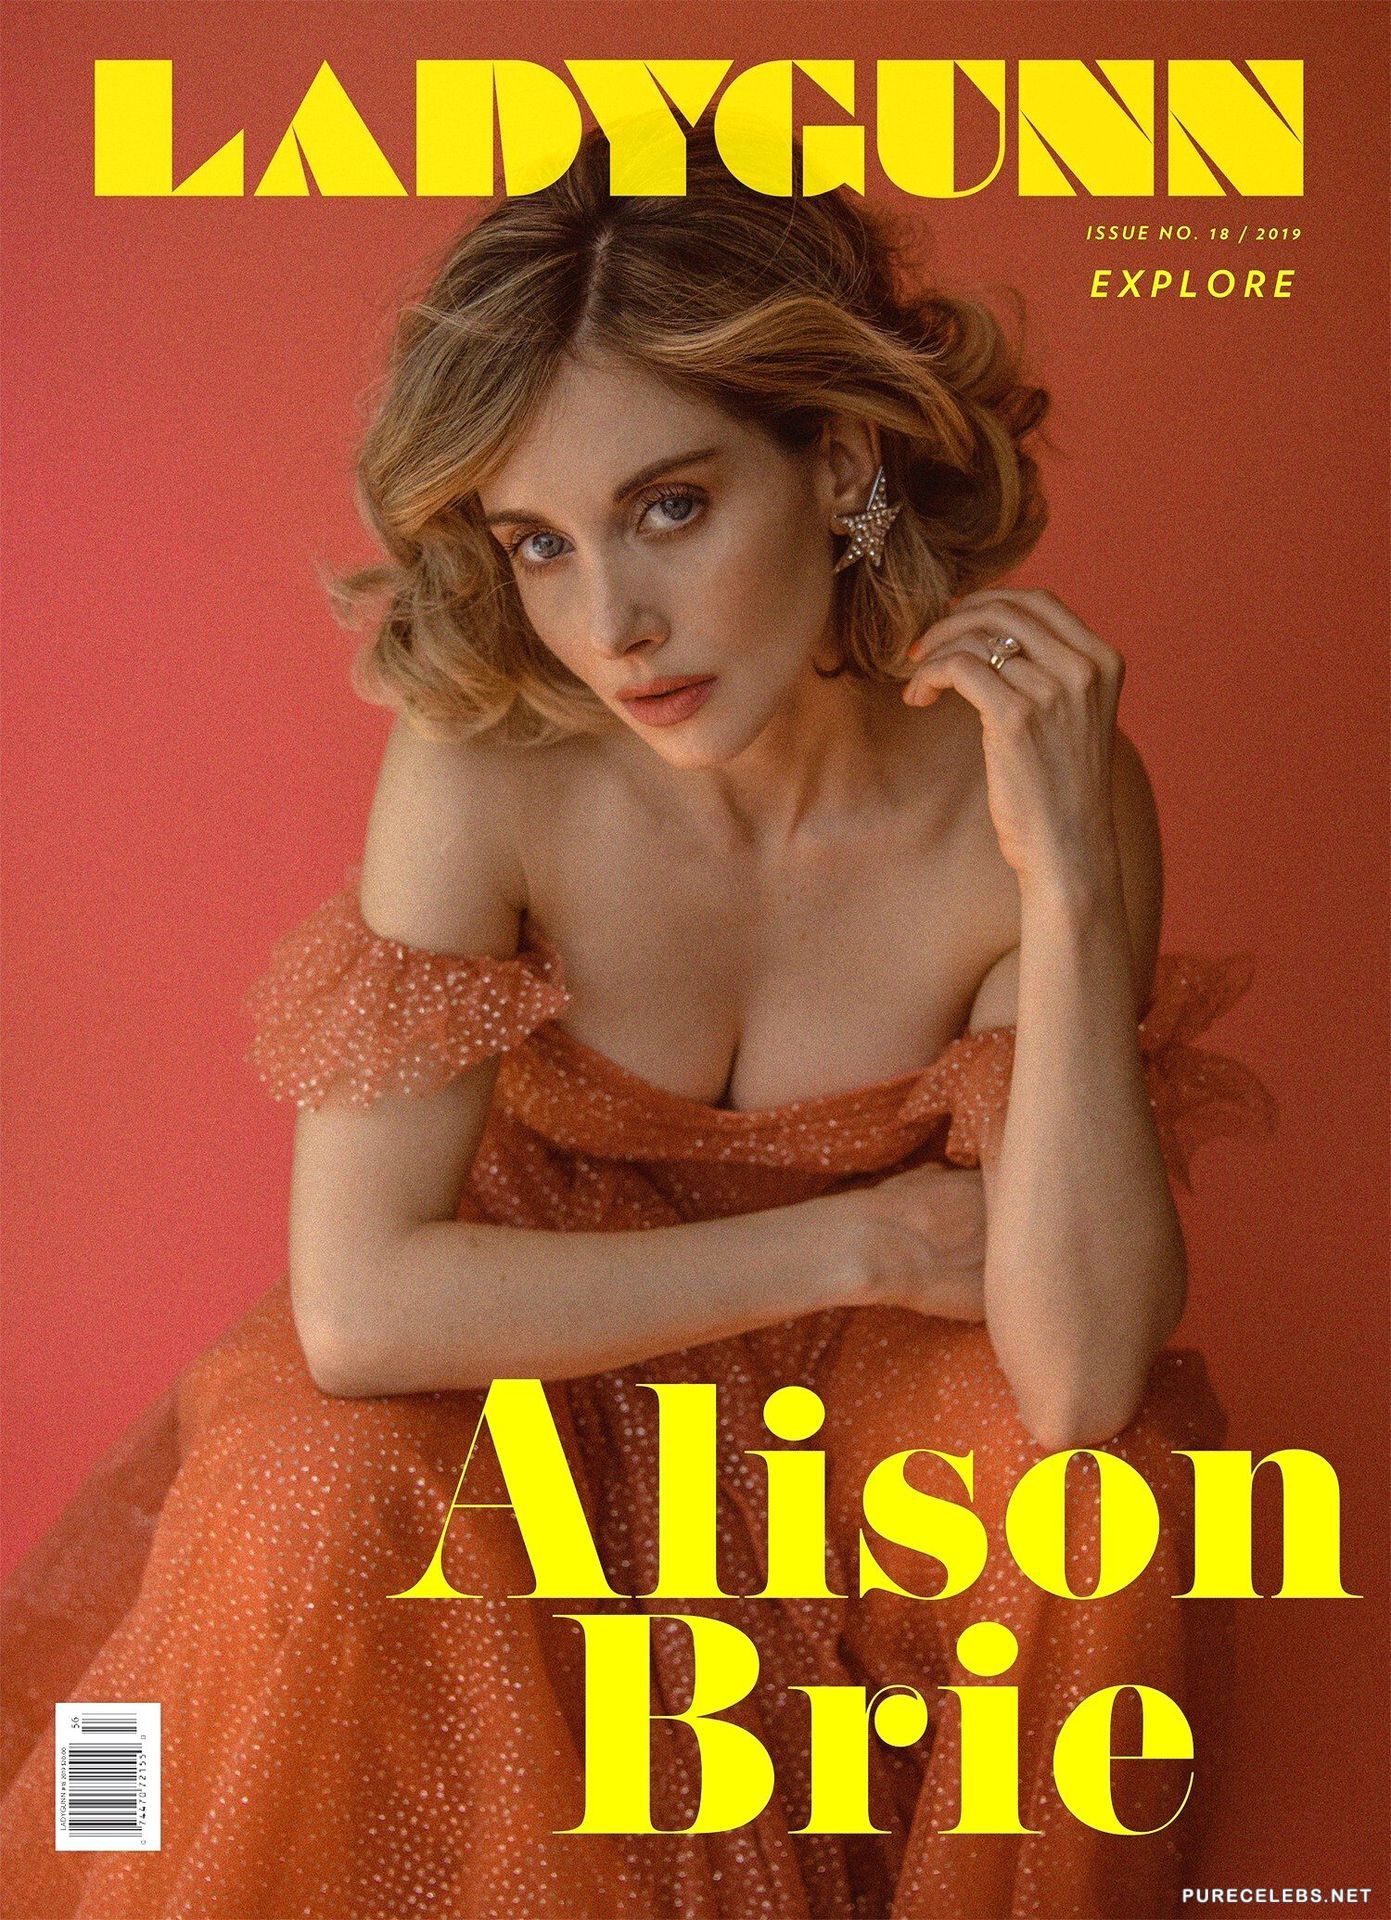 Leaked alison brie posing sexy for ladygunn magazine